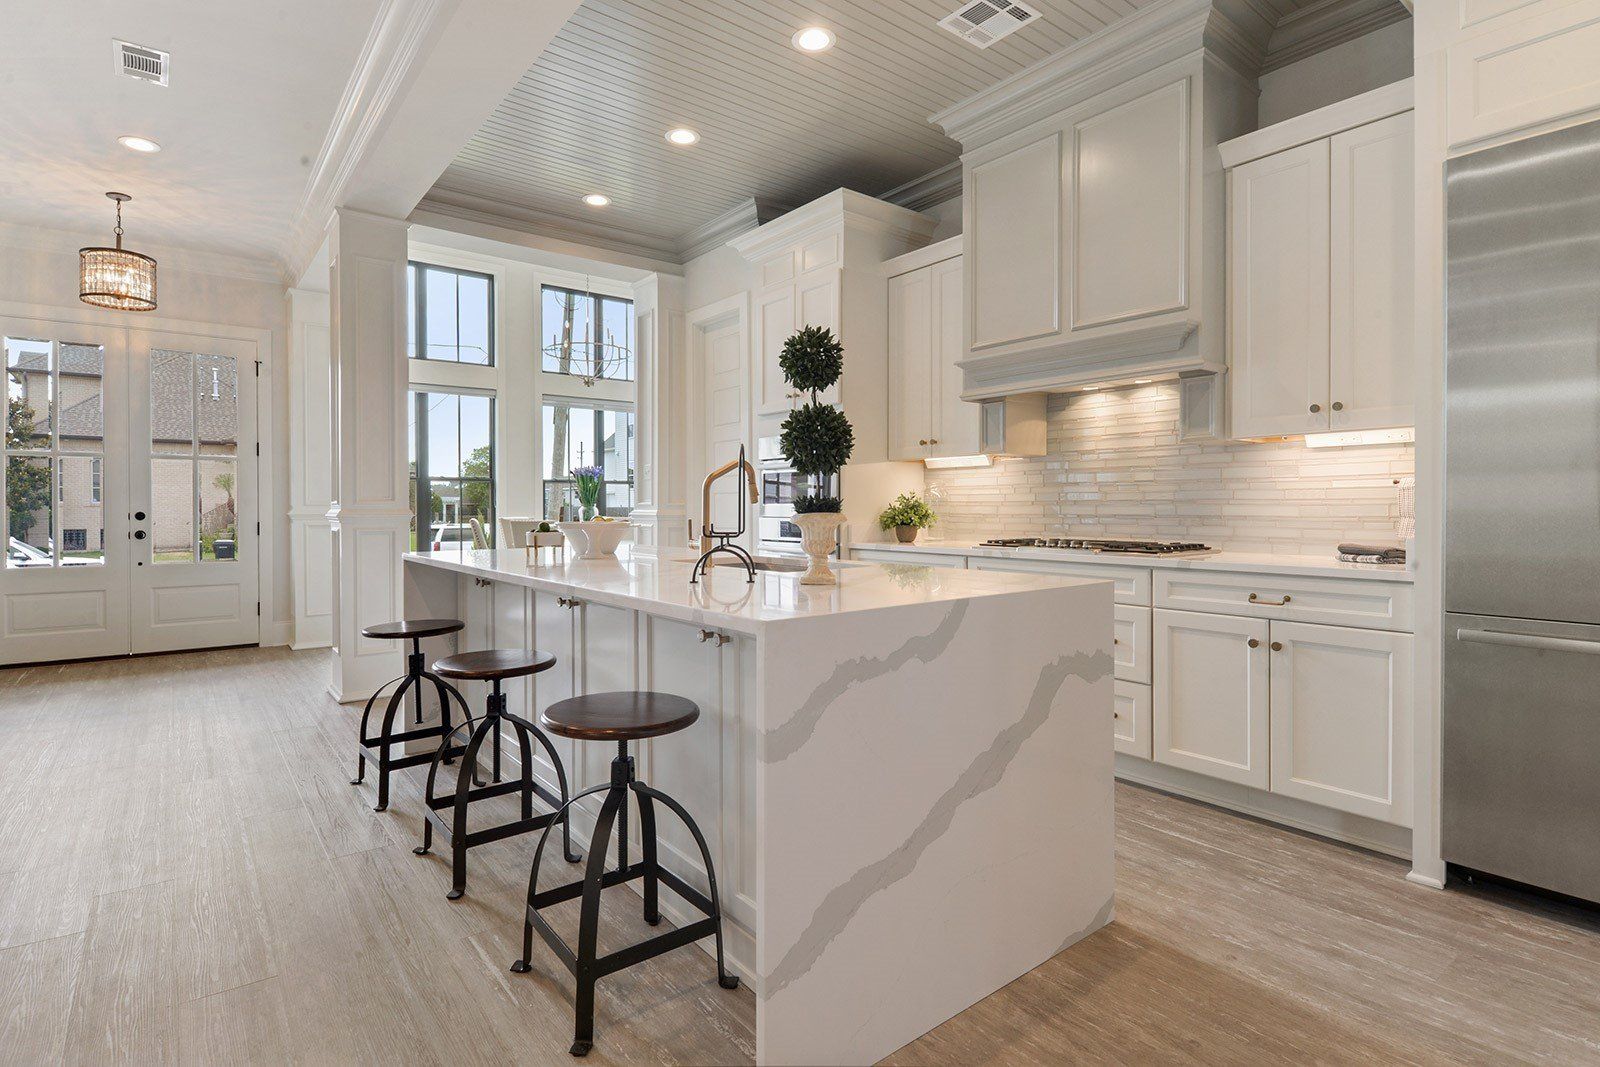 Kitchen counter with stools